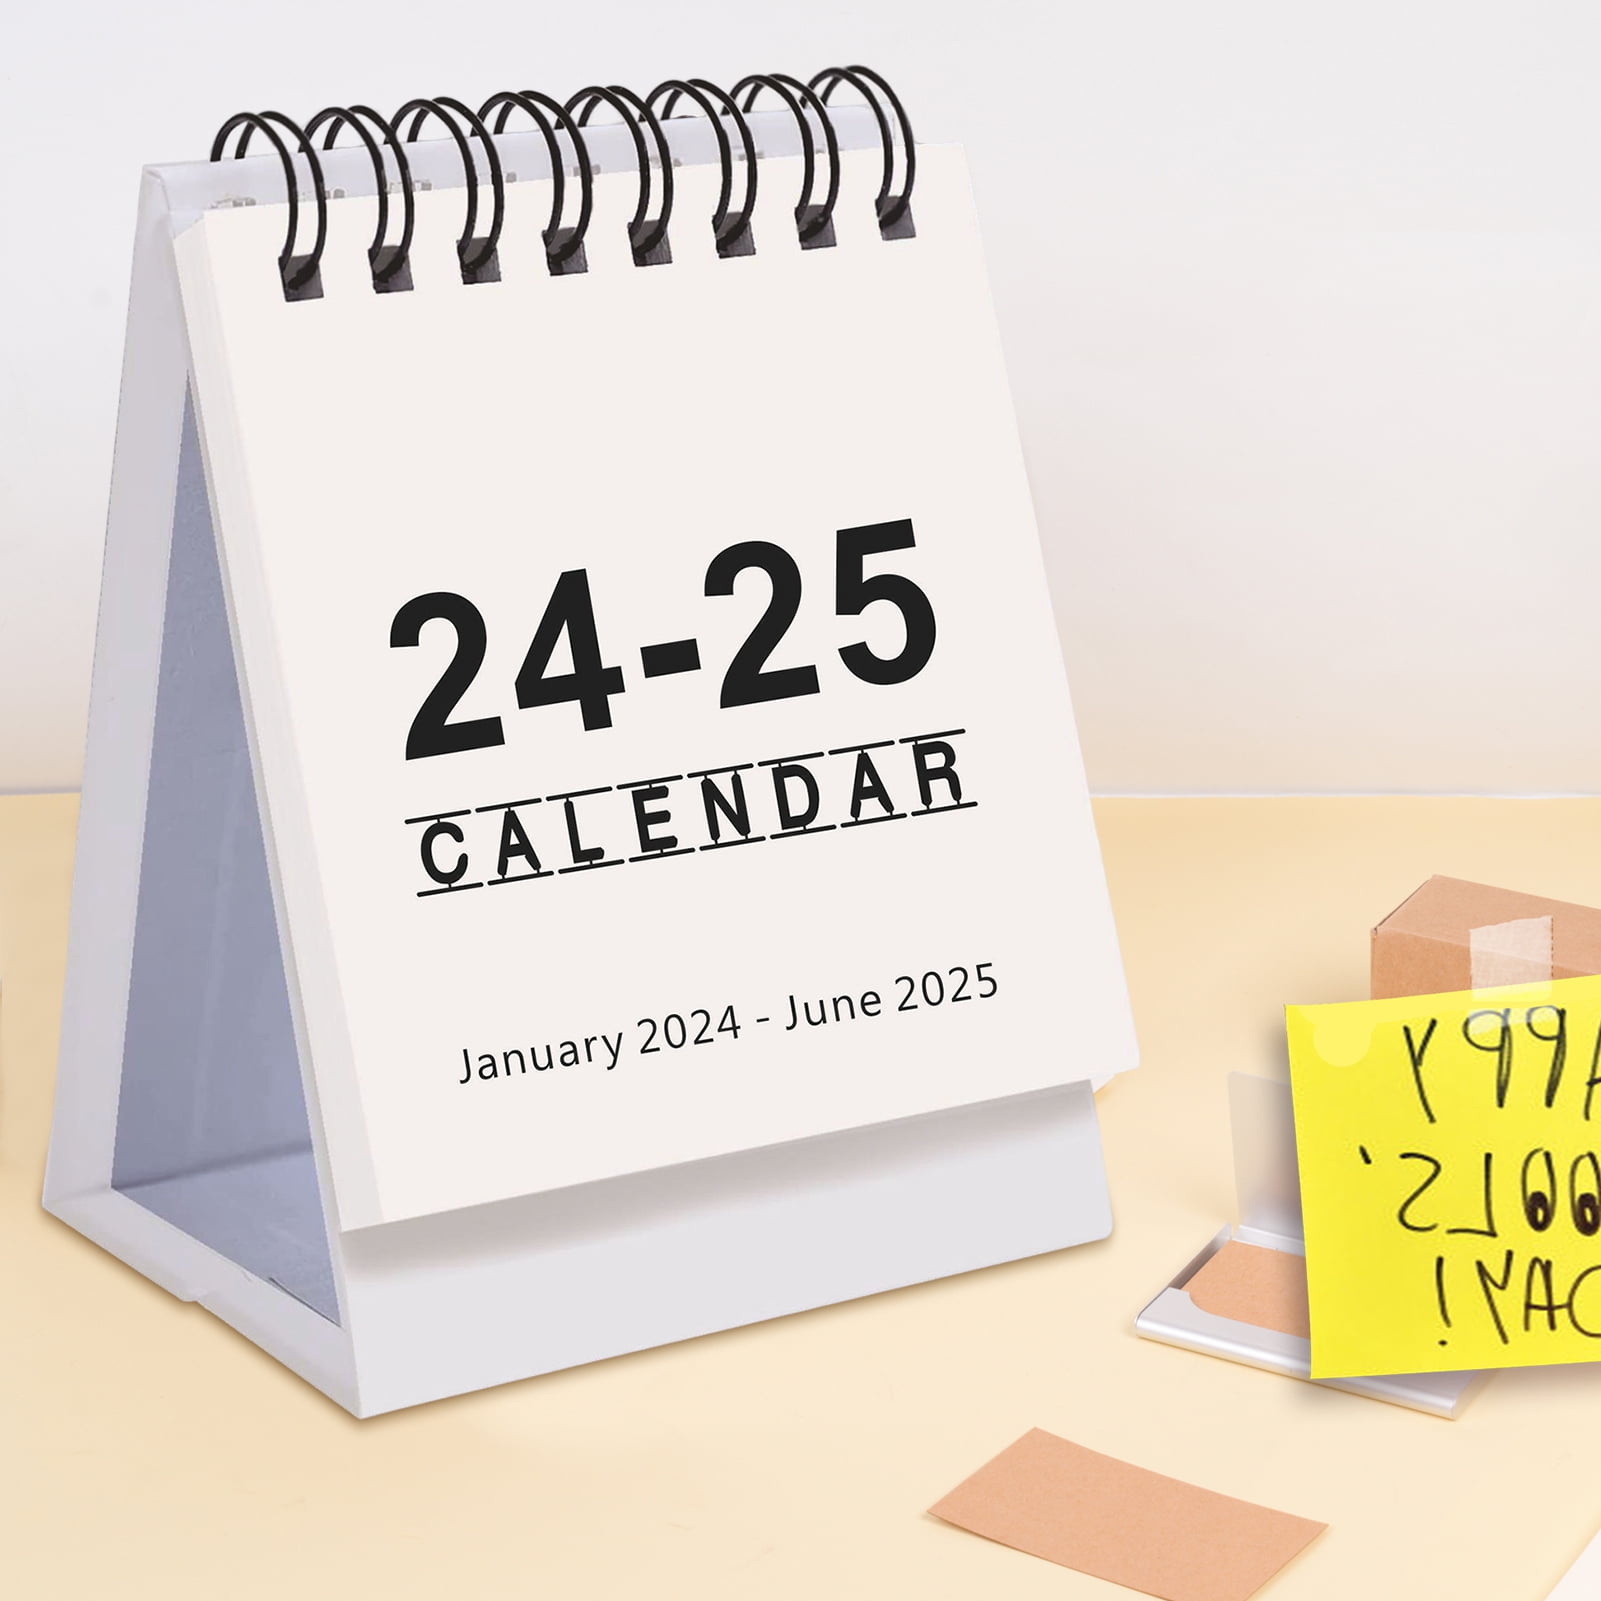 Calendar 2024 - 2025: Anime and Entertainment Calendar, Eco Friendly, Jan  2024 to Jun 2026, 30 Months, 17 x 11 Opened, Thick & Sturdy Paper, Great